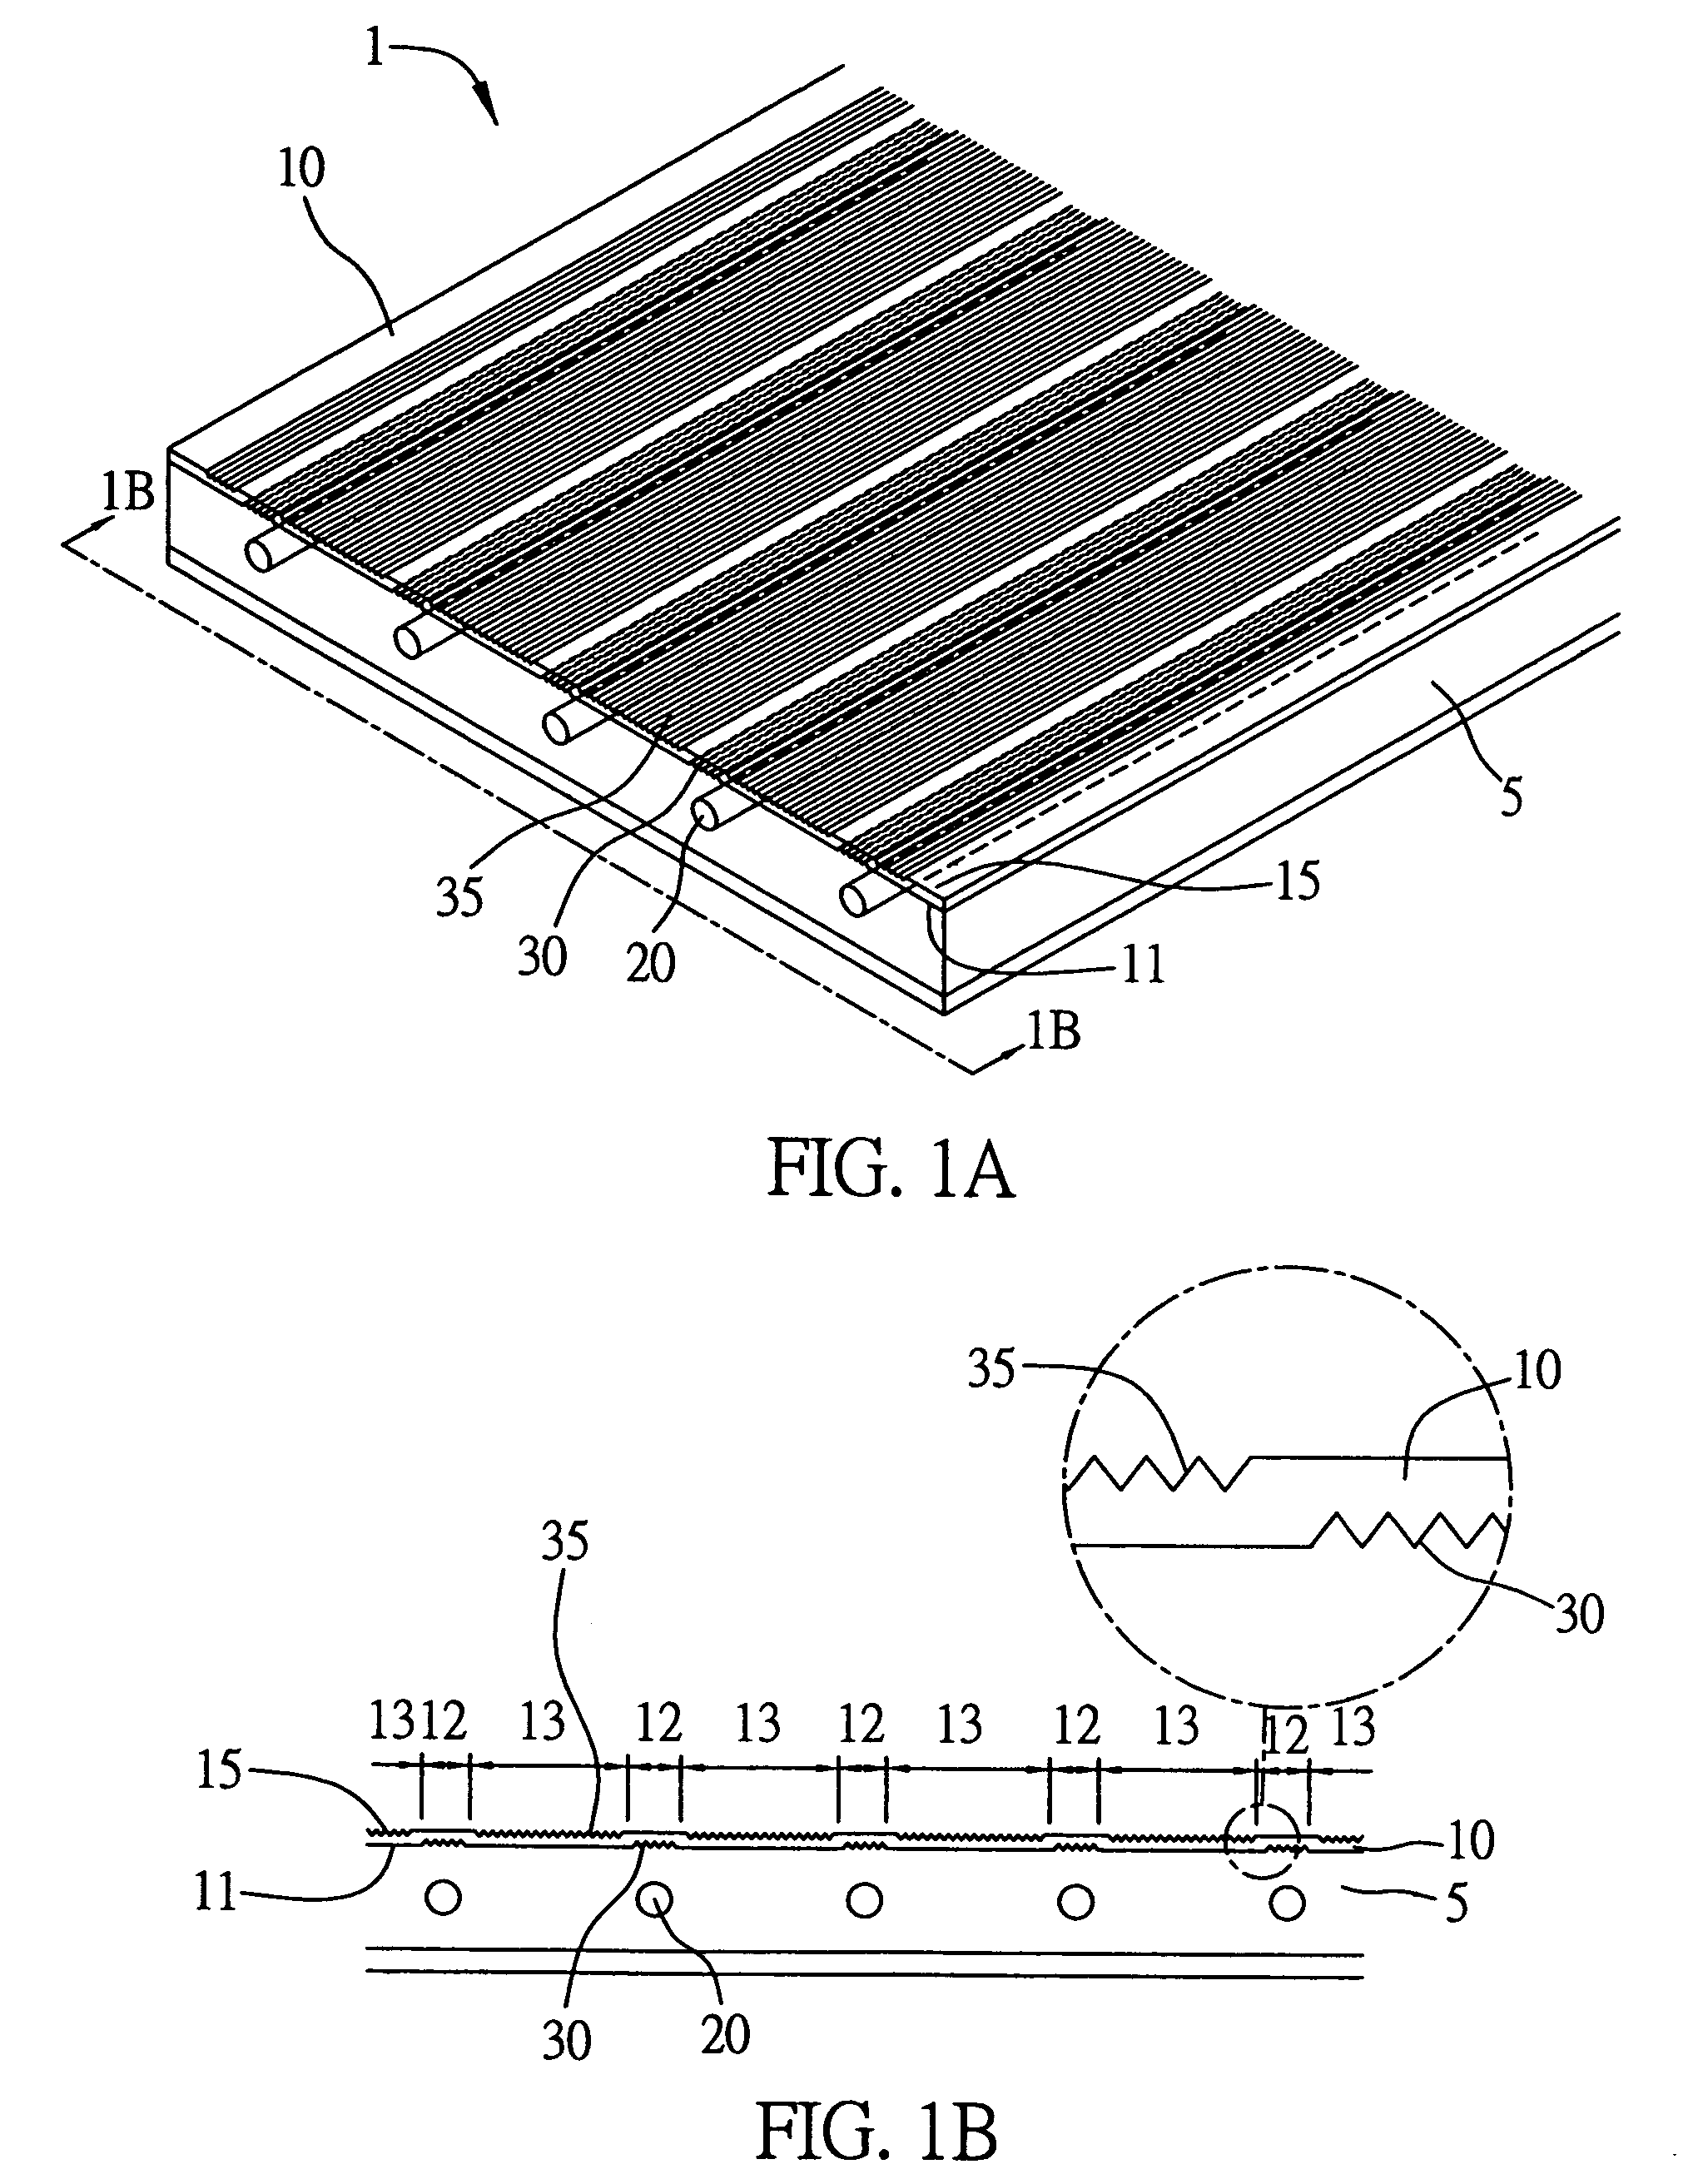 Apparatus for homogeneously distributing lights